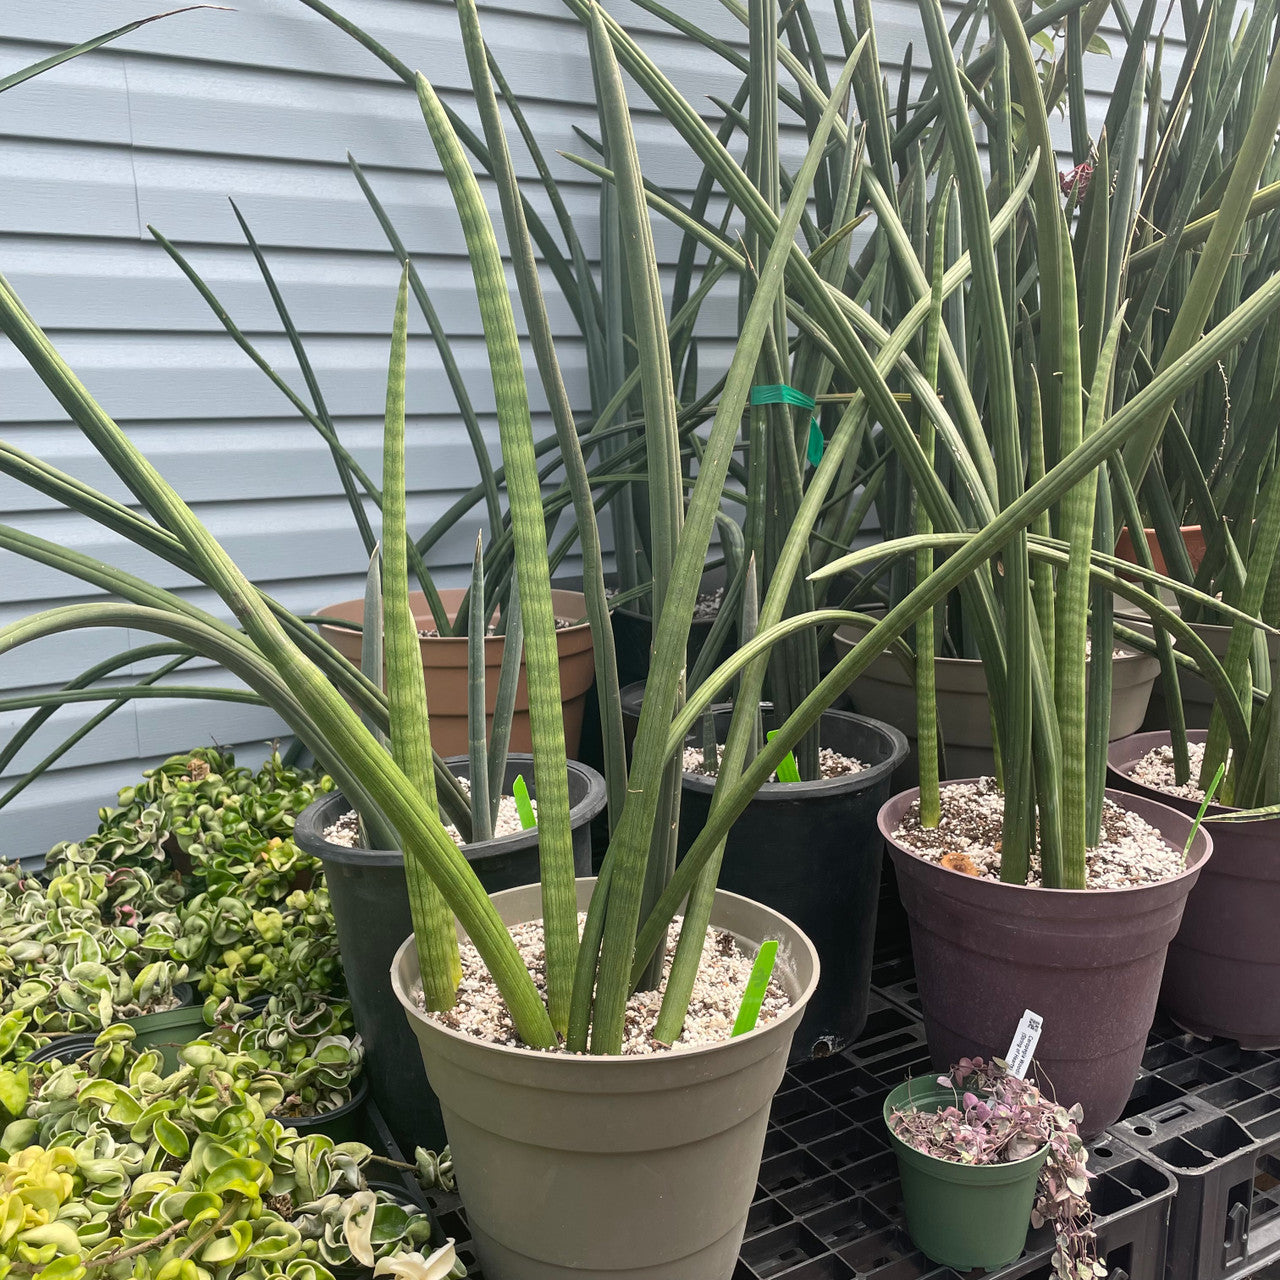 A Sansevieria Cylindrica potted